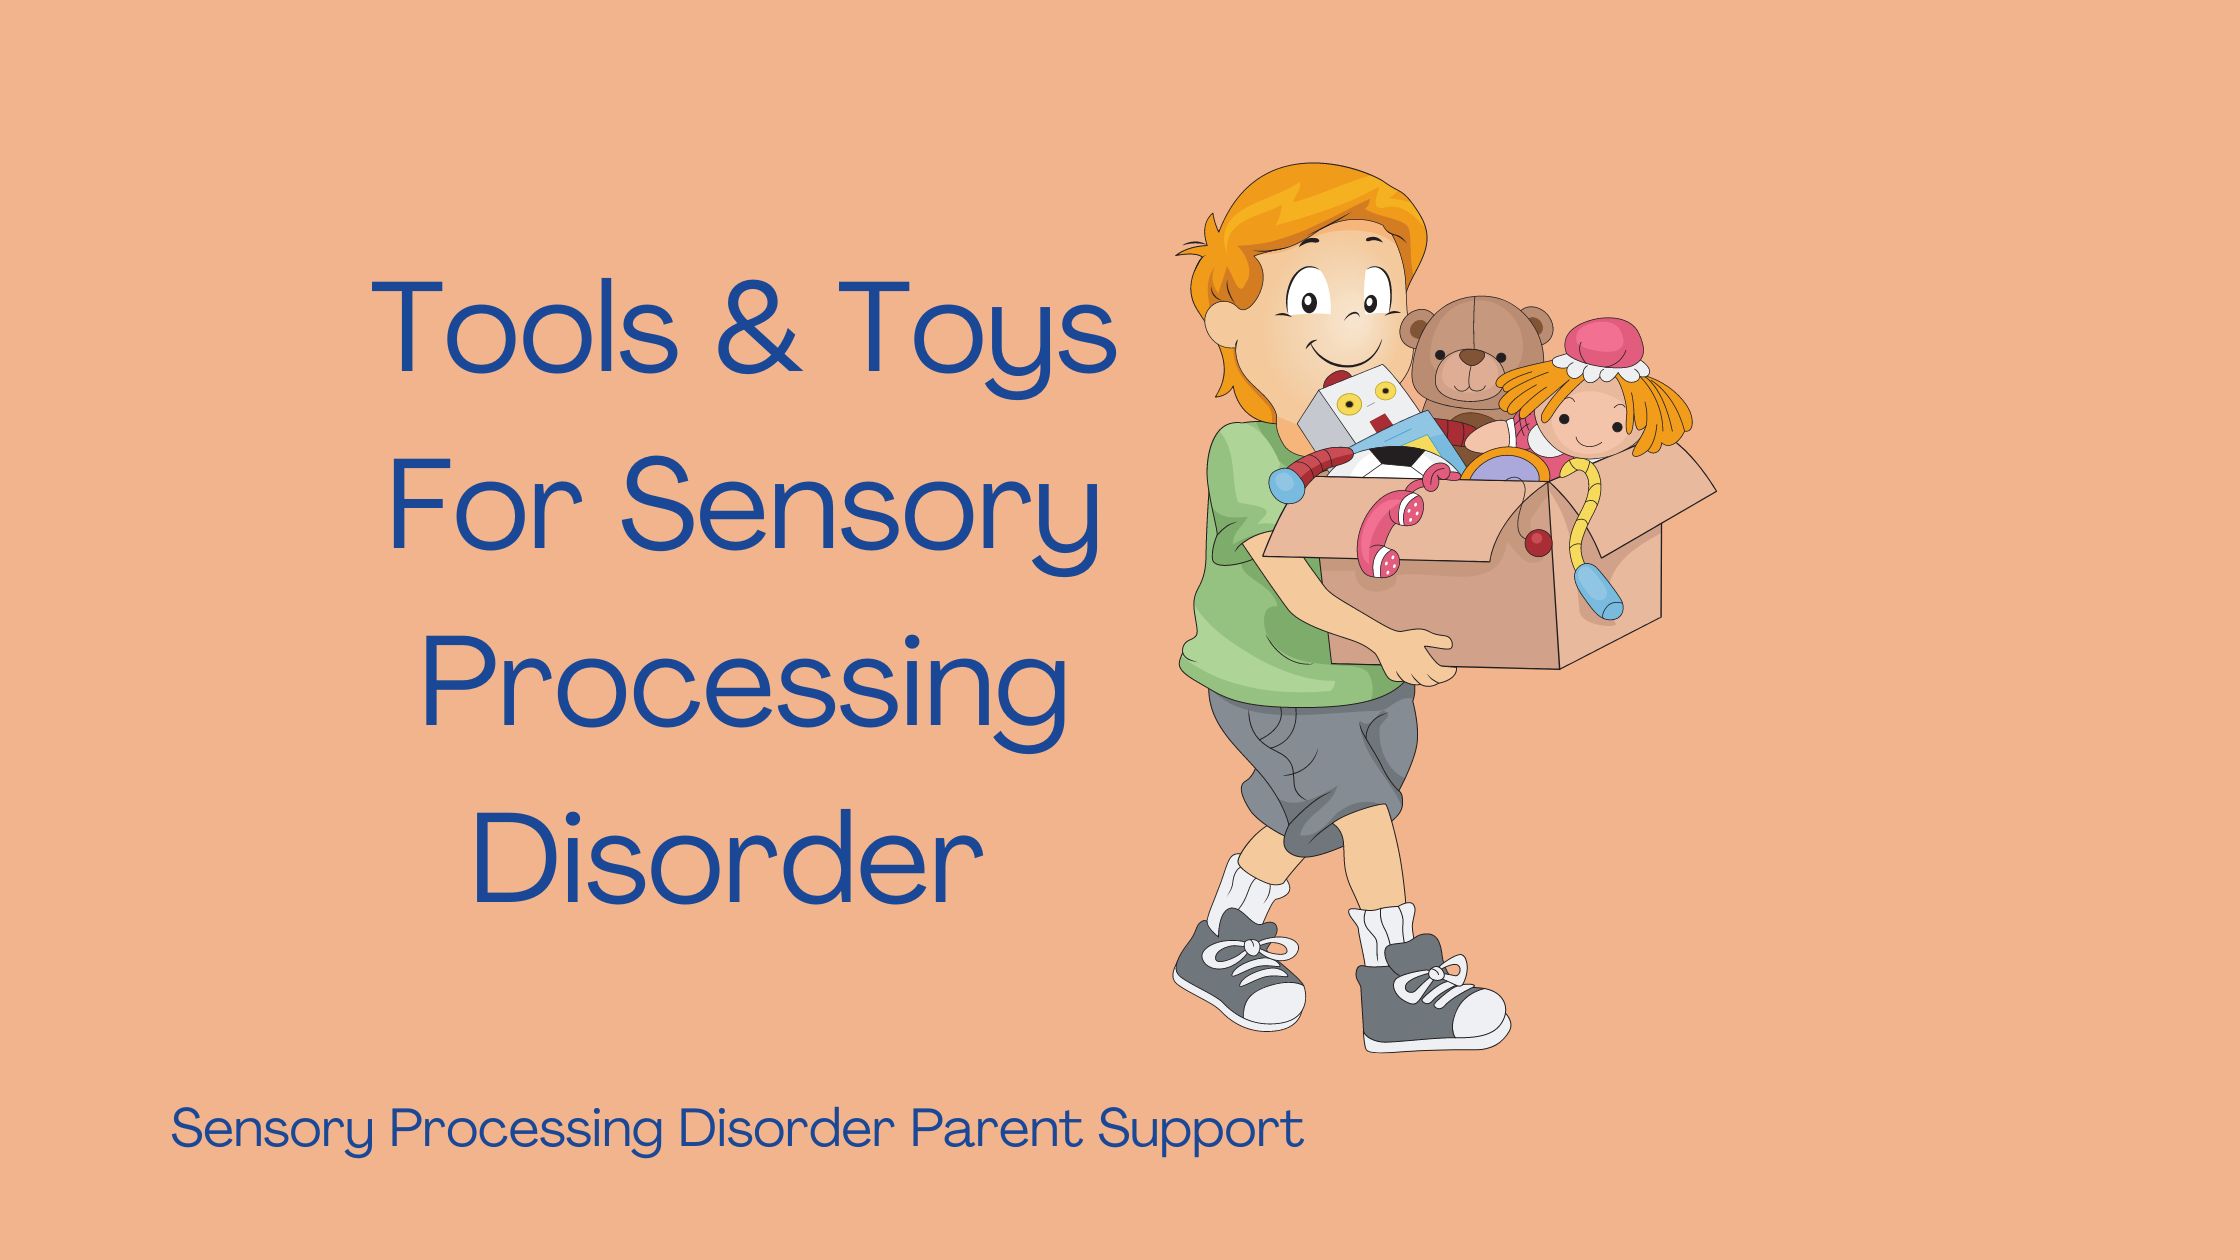 Tools & Toys For Sensory Processing Disorder  Sensory Processing Disorder